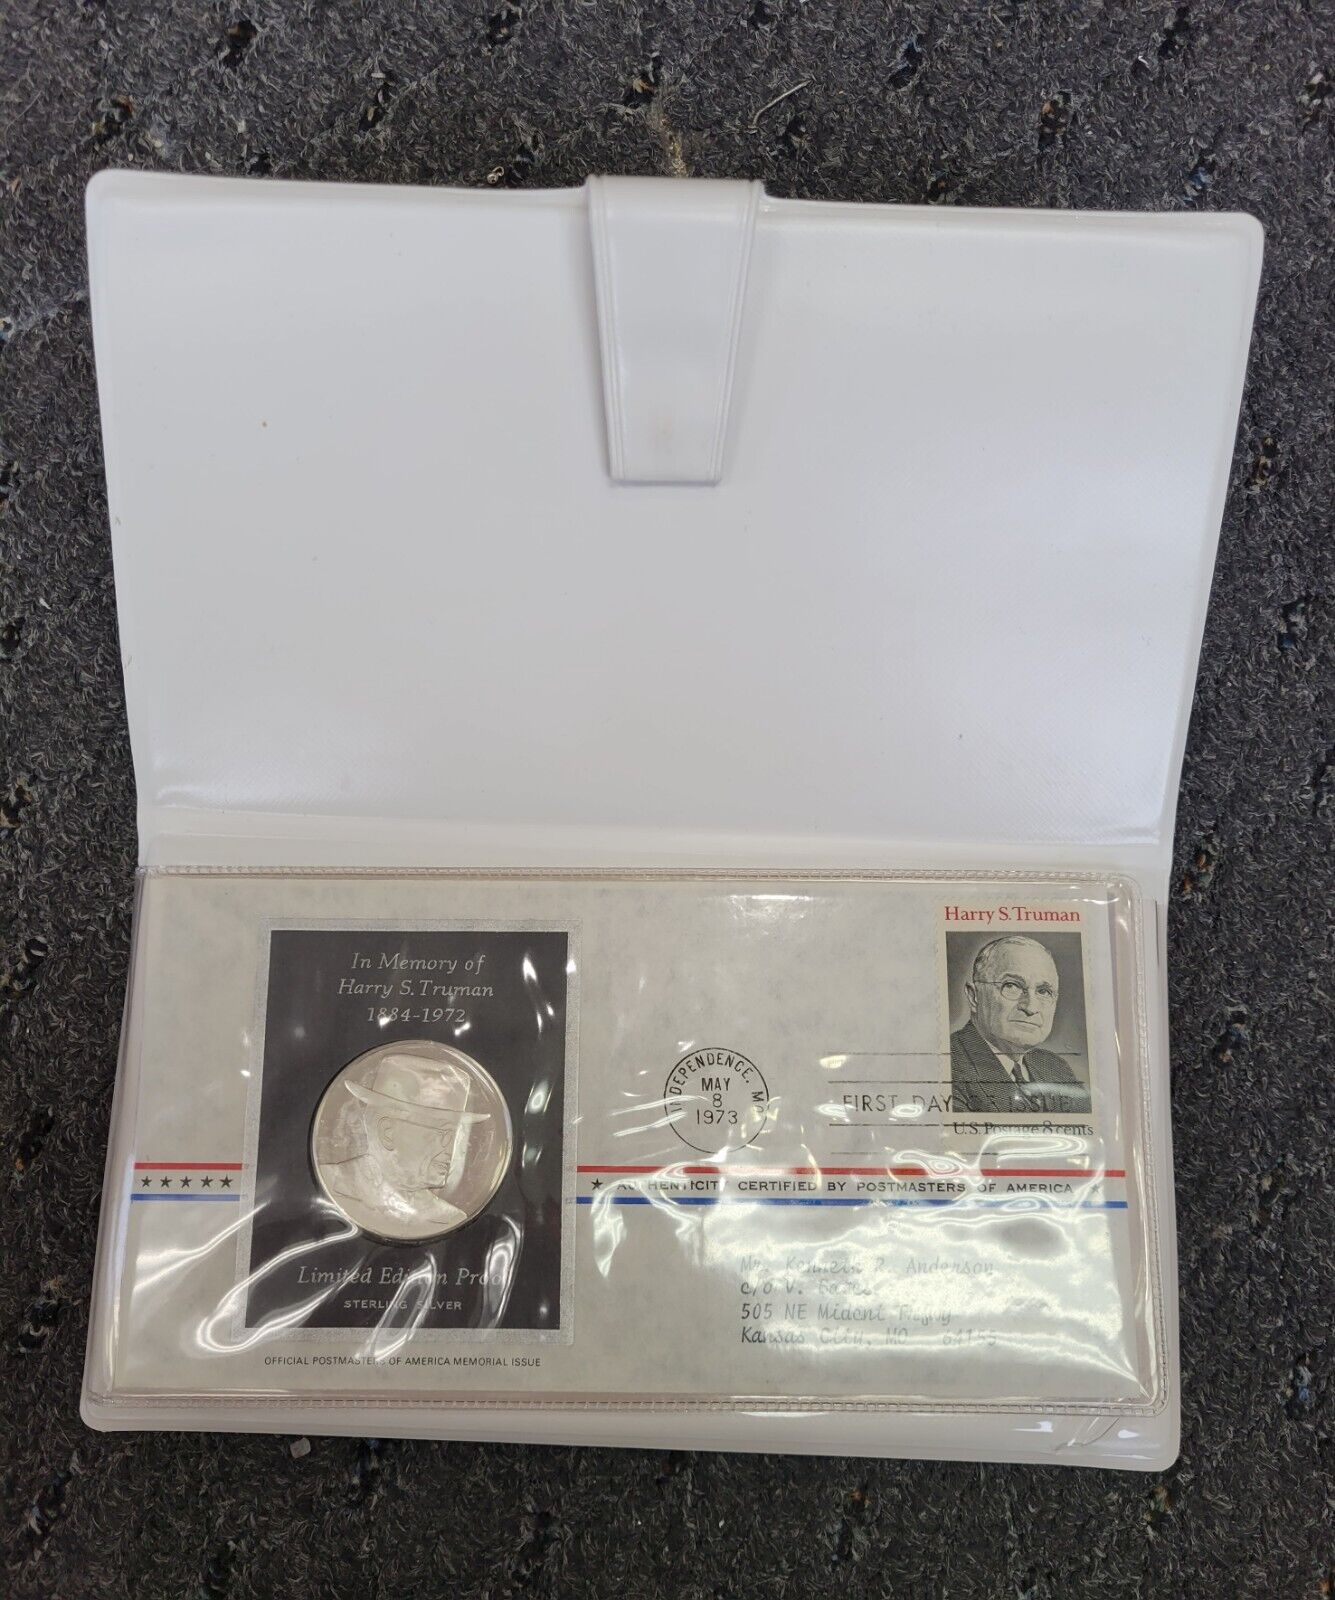 1973 Postmasters Of America Harry S Truman Independence MO. Franklin Mint